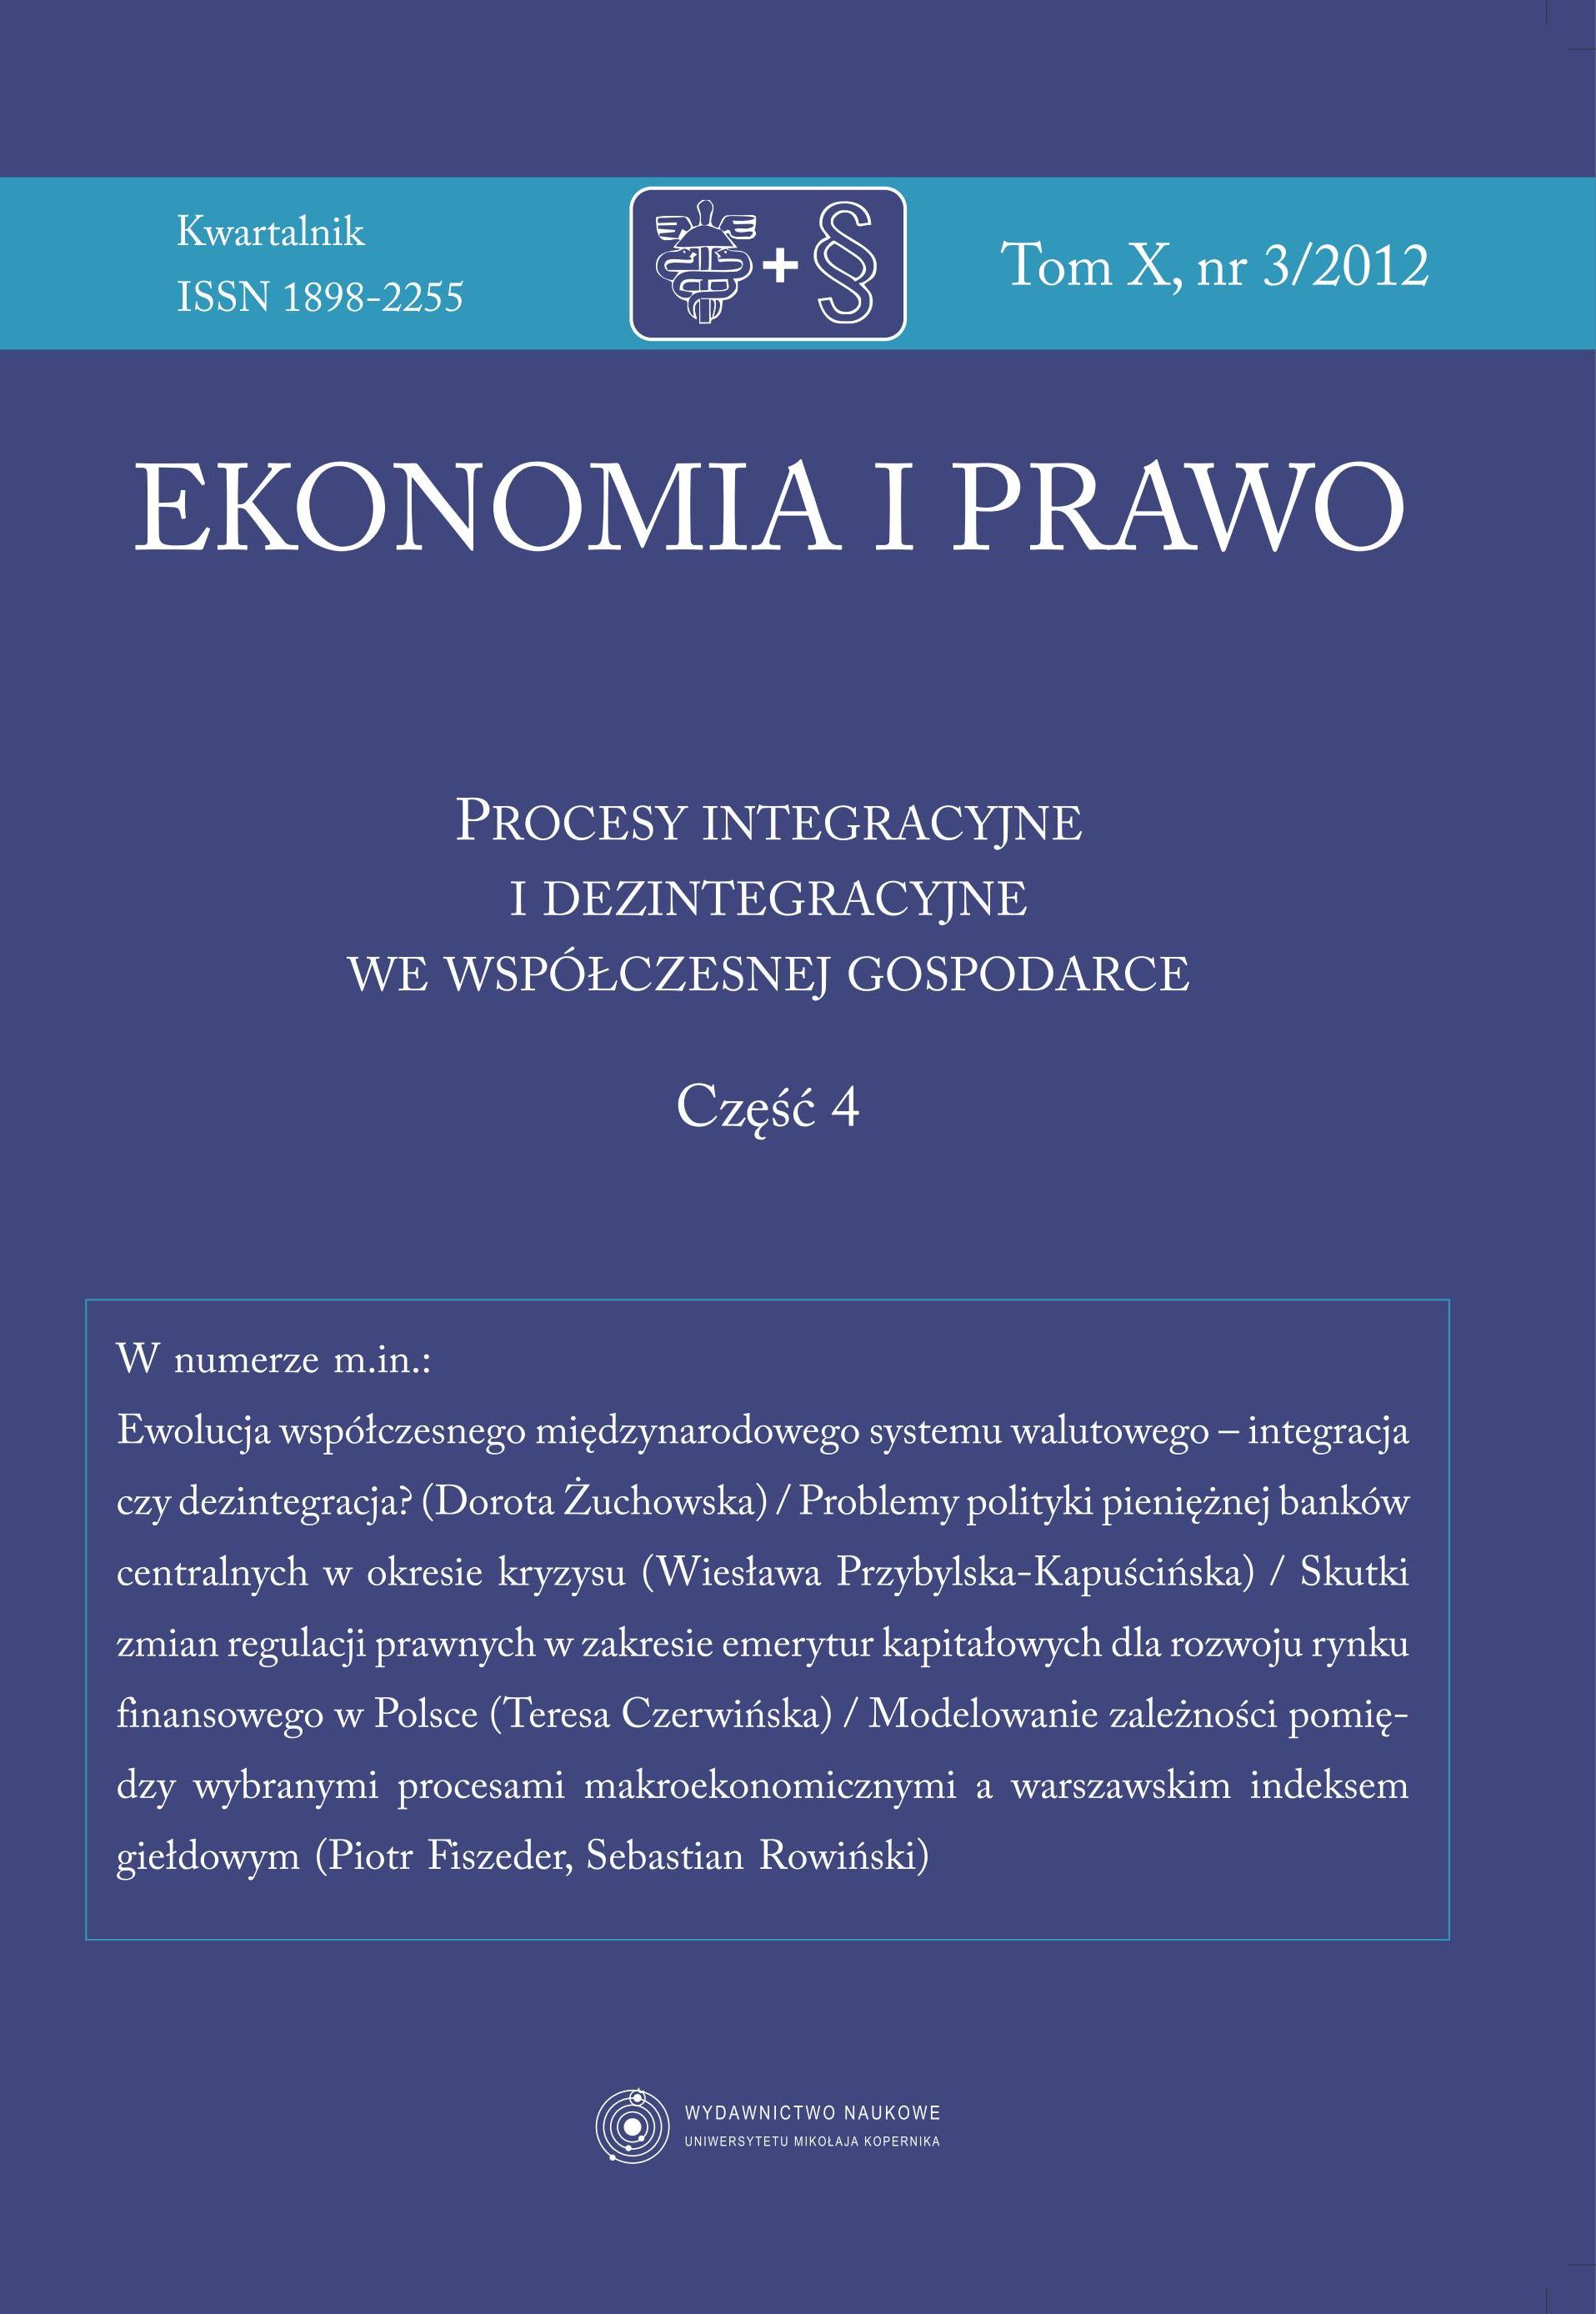 MODELING RELATIONS BETWEEN SELECTED MACROECONOMIC PROCESSES AND THE WARSAW STOCK EXCHANGE INDEX Cover Image